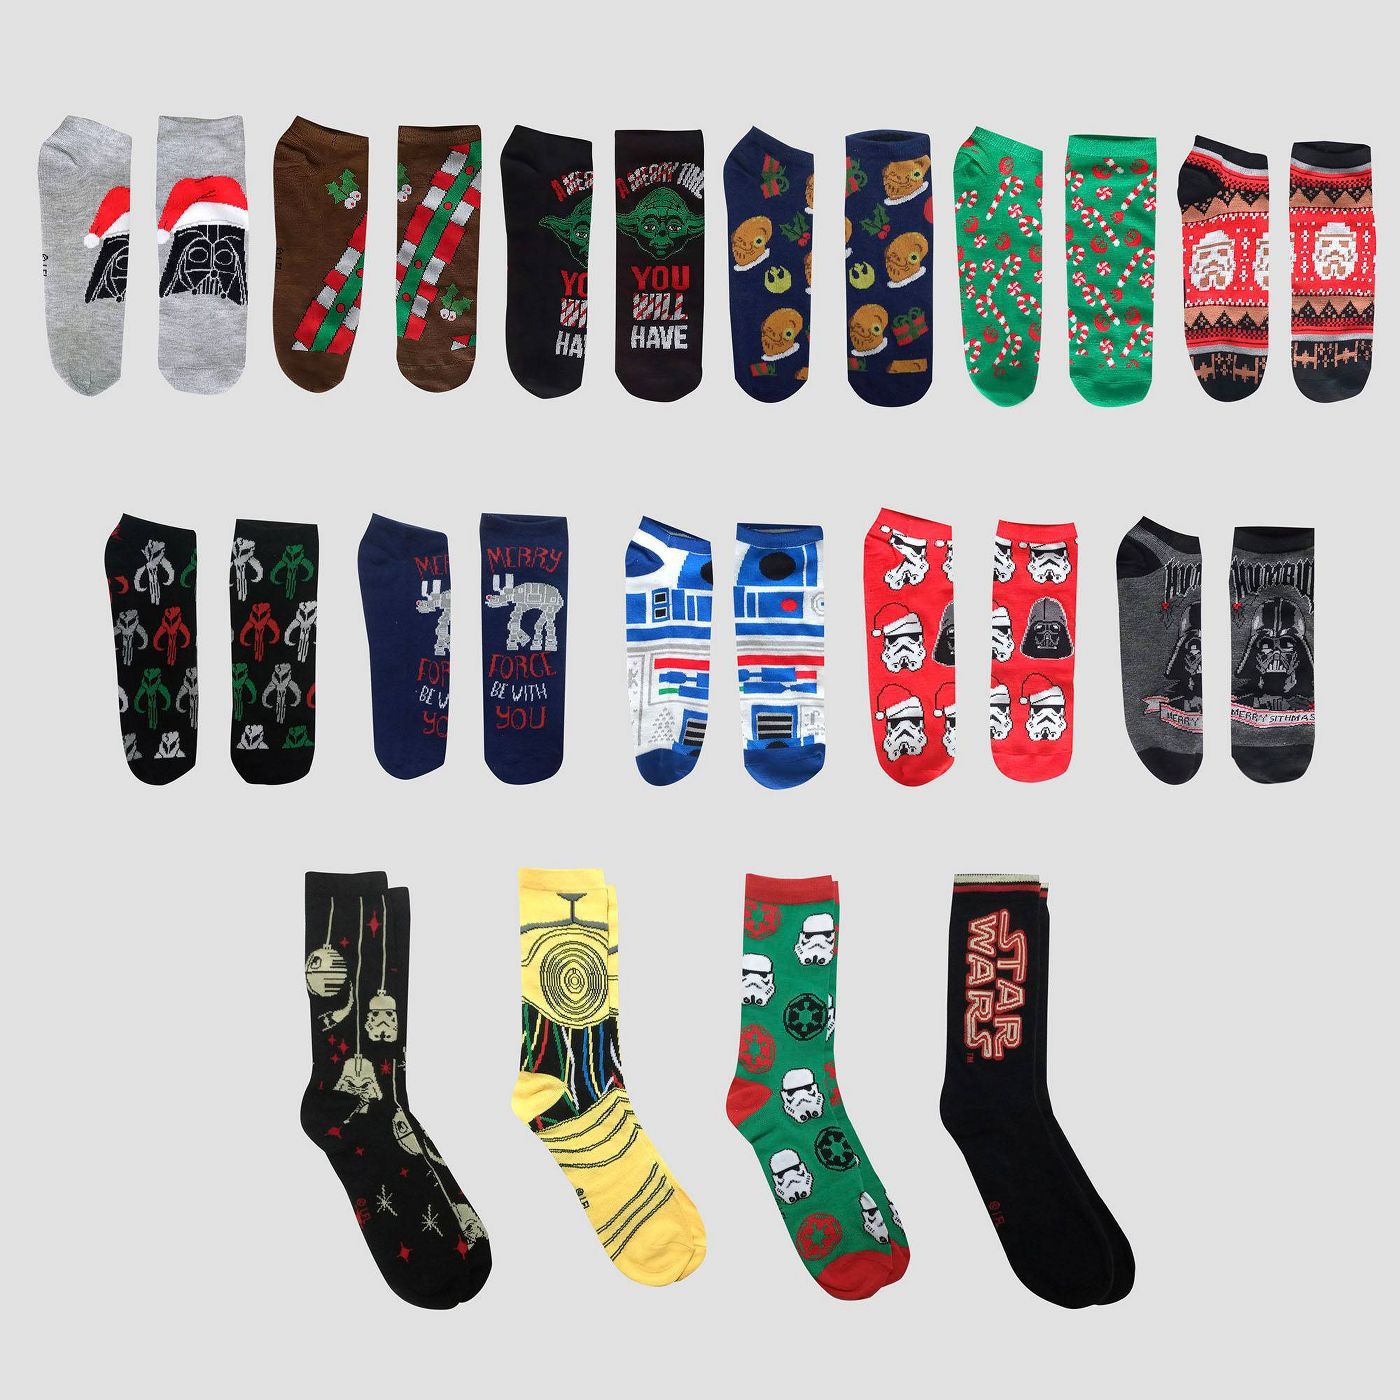 Men's Star Wars 15 Days of Socks Advent Calendar - Assorted Colors One Size - image 1 of 4